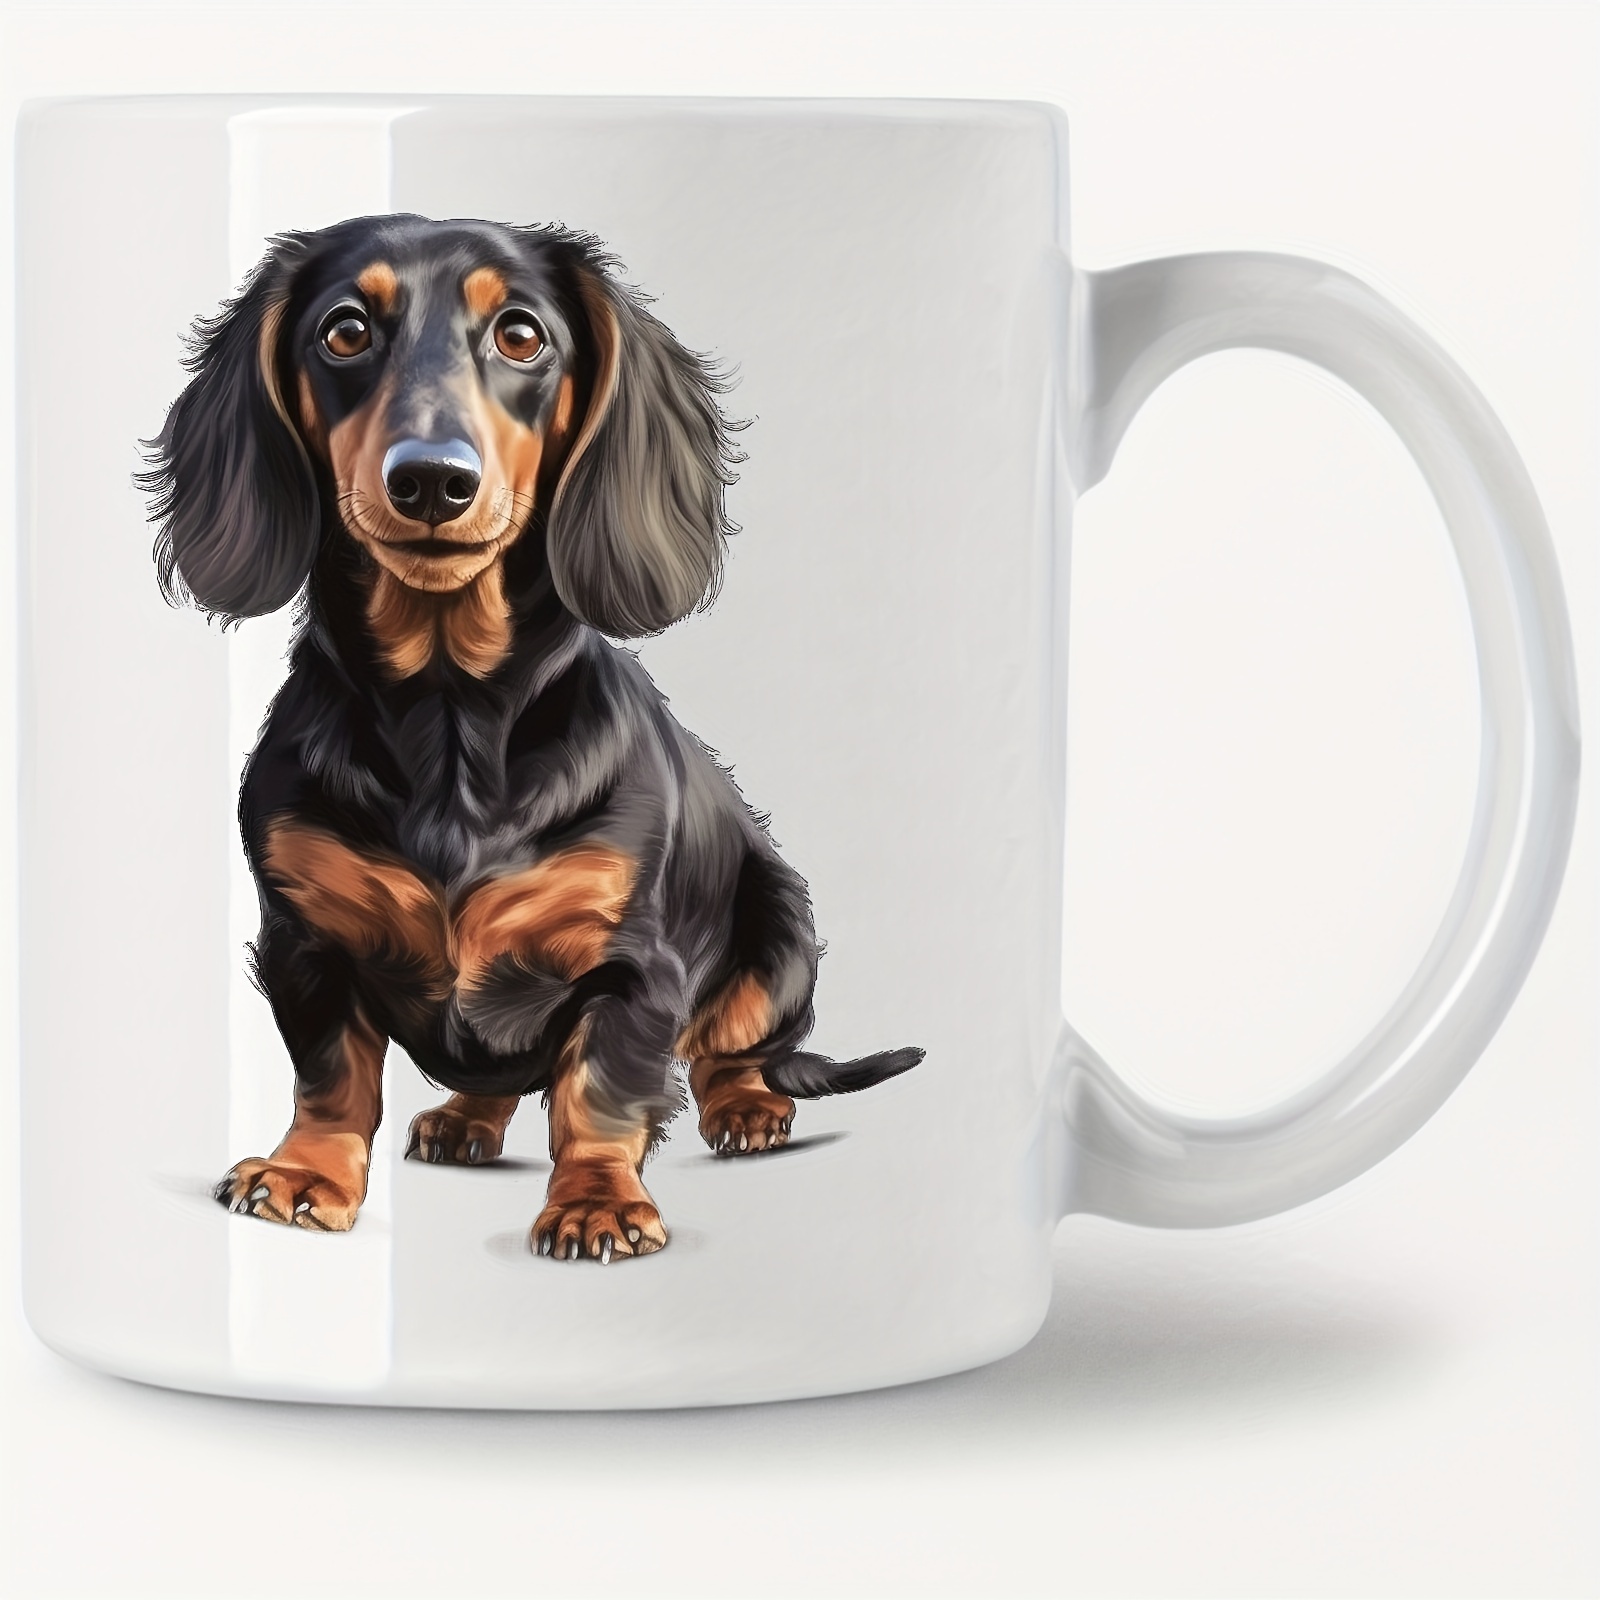 

11oz Ceramic Coffee Mug, Dachshund Watercolor Design, Dishwasher & Microwave Safe, Perfect Gift For Dog Lovers & Coffee Enthusiasts